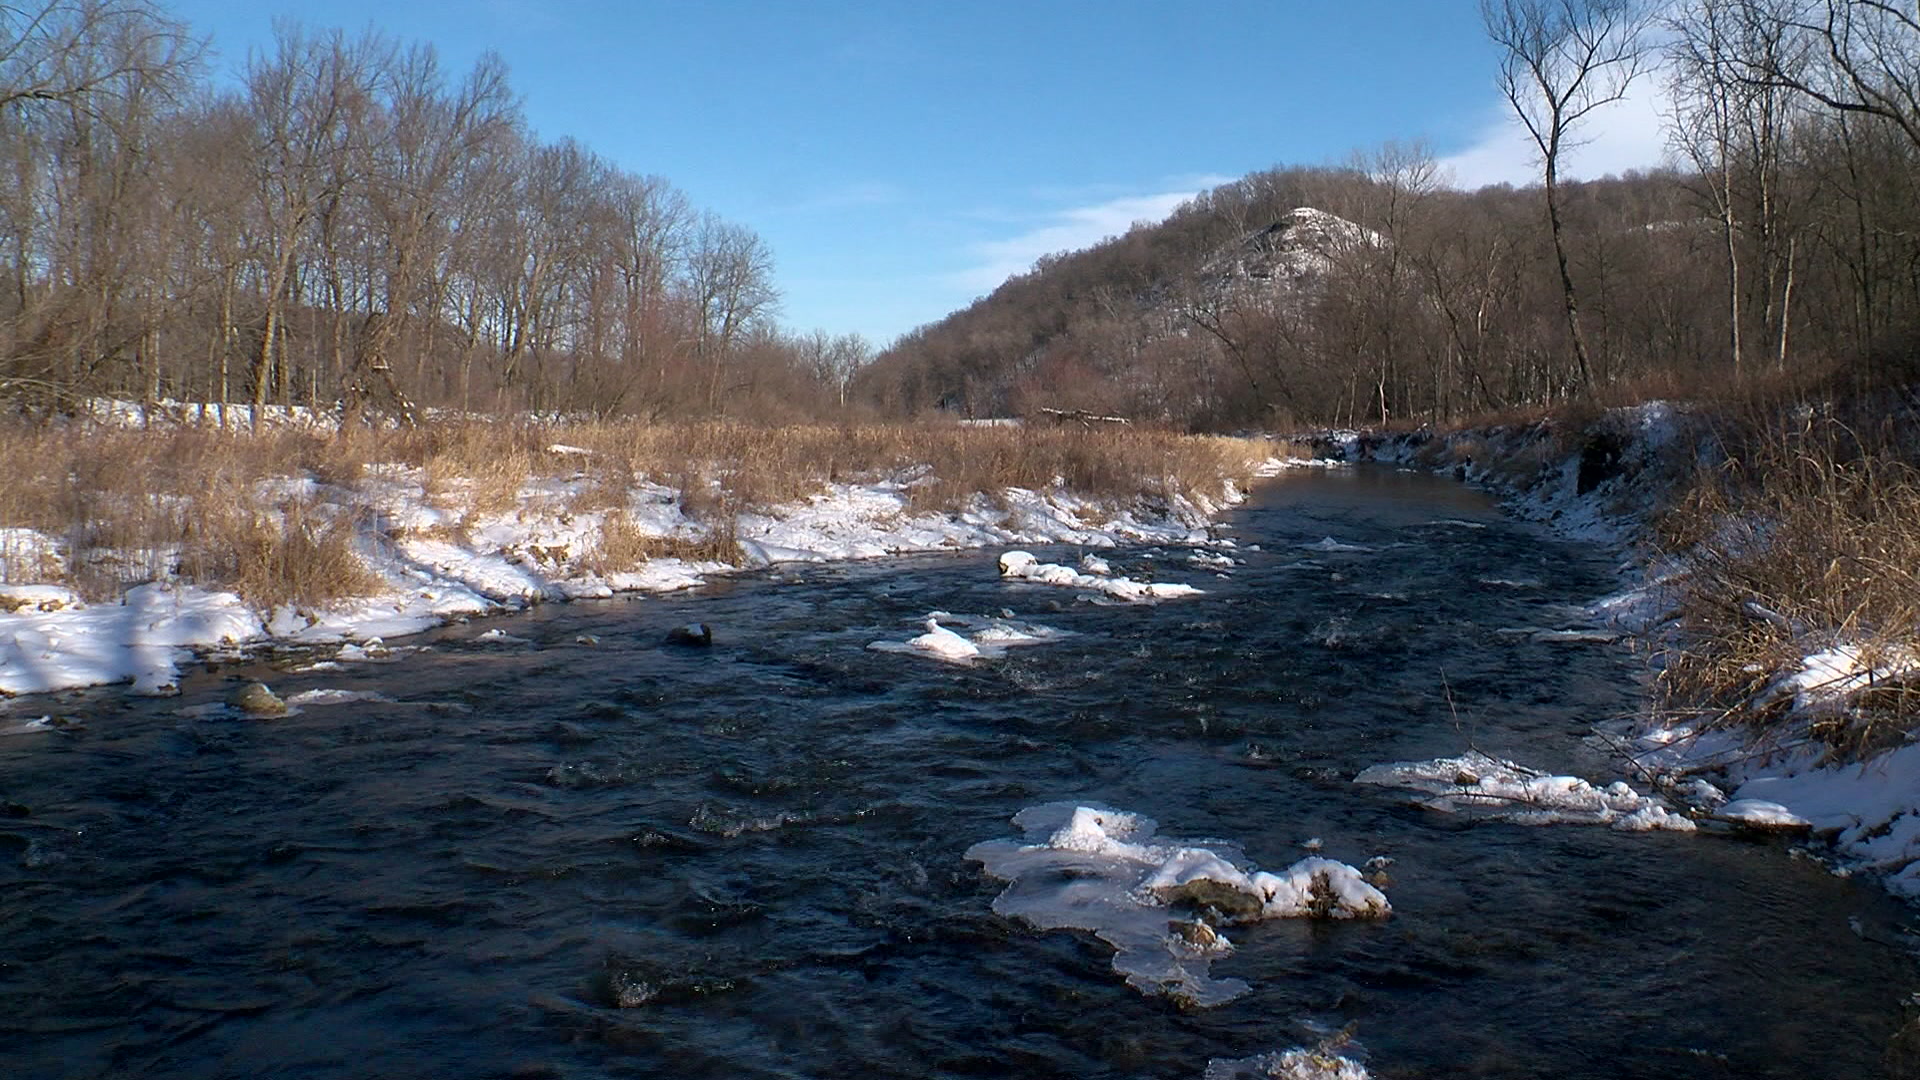 ‘This Place Is Pretty Breathtaking’: Snow Activities At Whitewater State Park